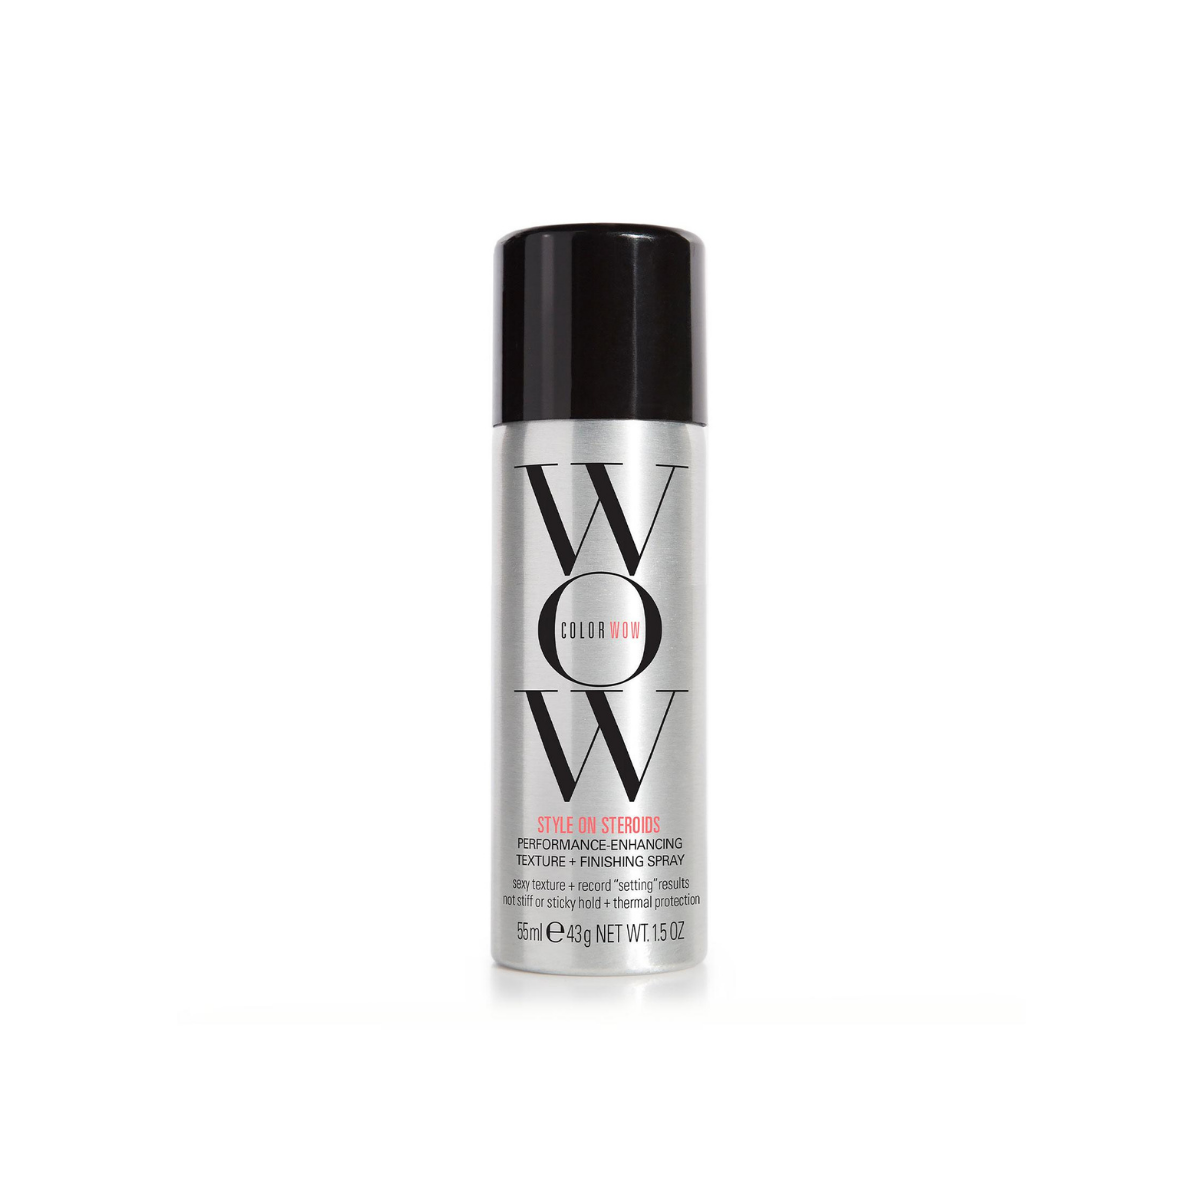 Color Wow Style on Steroids Performance Enhancing Texture + Finishing Spray 50ml